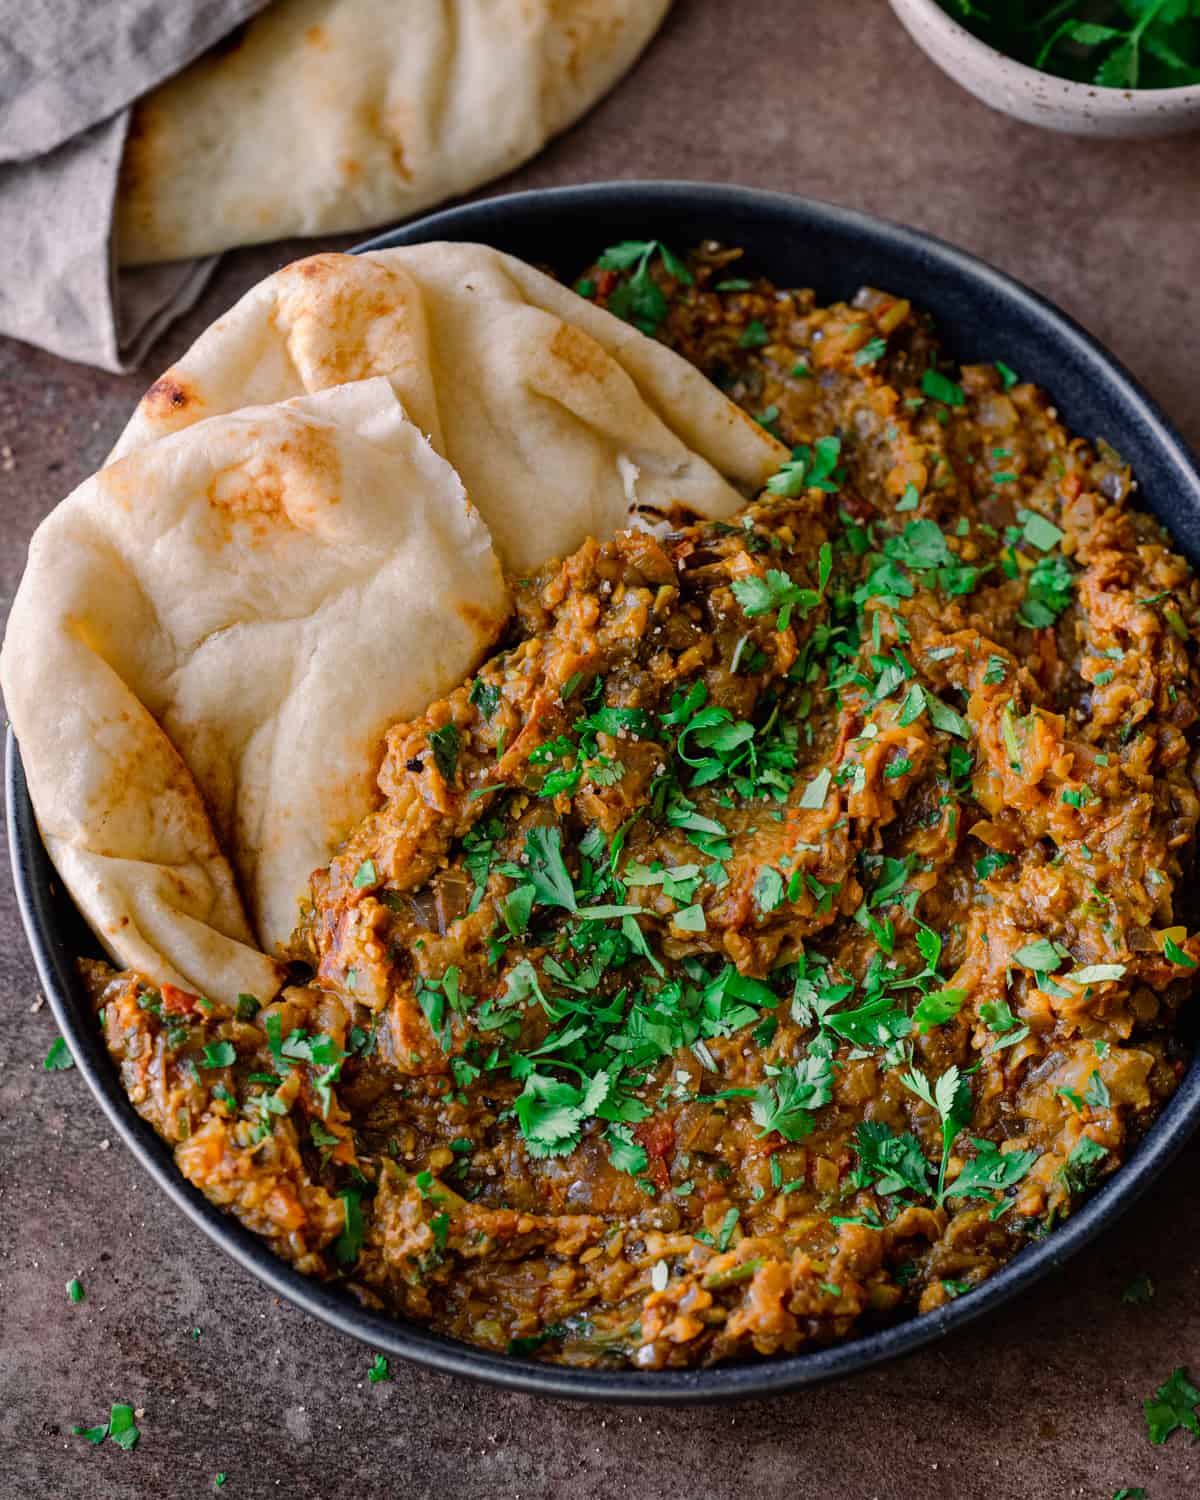 baingan bharta in a shallow bowl with naan dipped into the dish